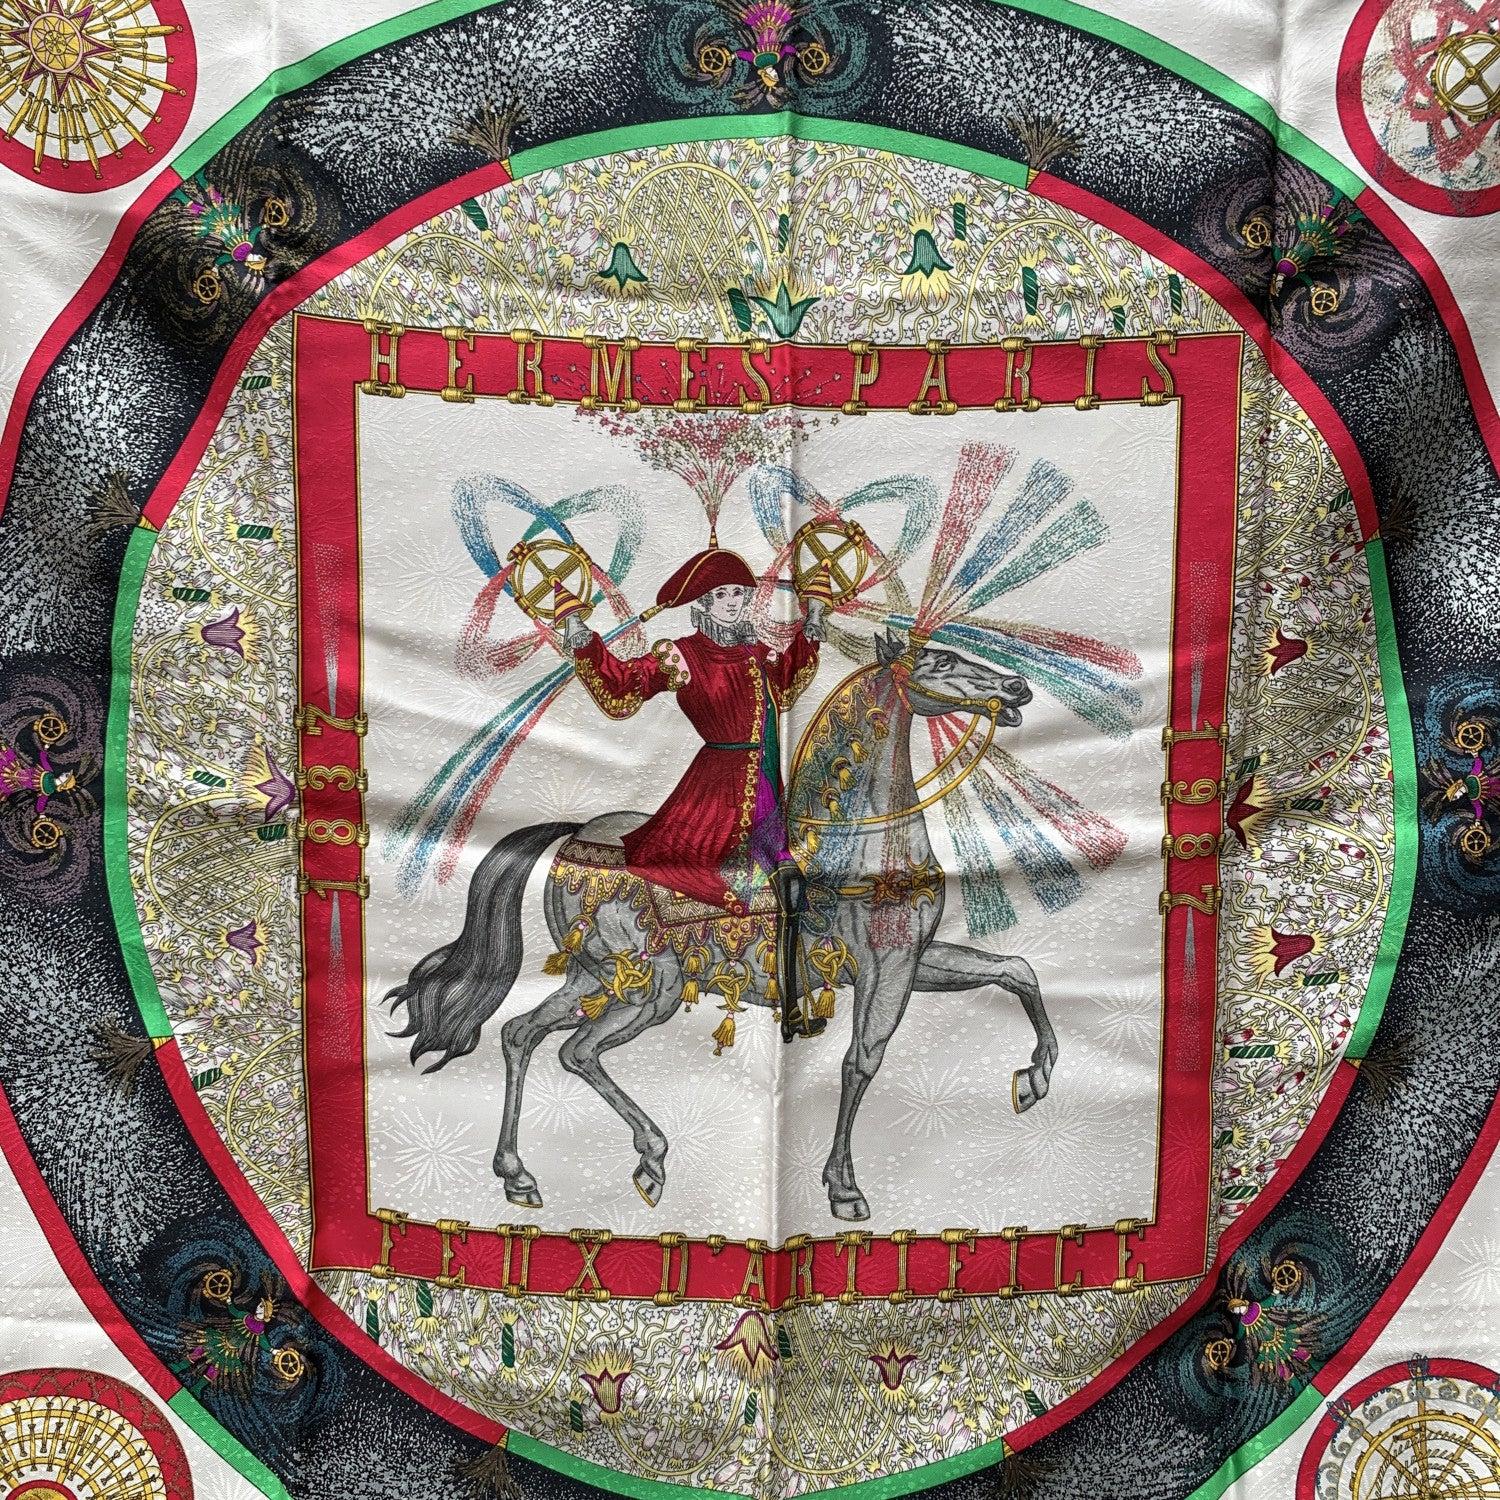 Stunning Hermes ' Feux d'Artifice' silk scarf designed by Michel Duchene and originally issued in 1987 for the 150th anniversary of the house. The knight in the center of the square corresponds to the equestrian statue that can be seen when you look